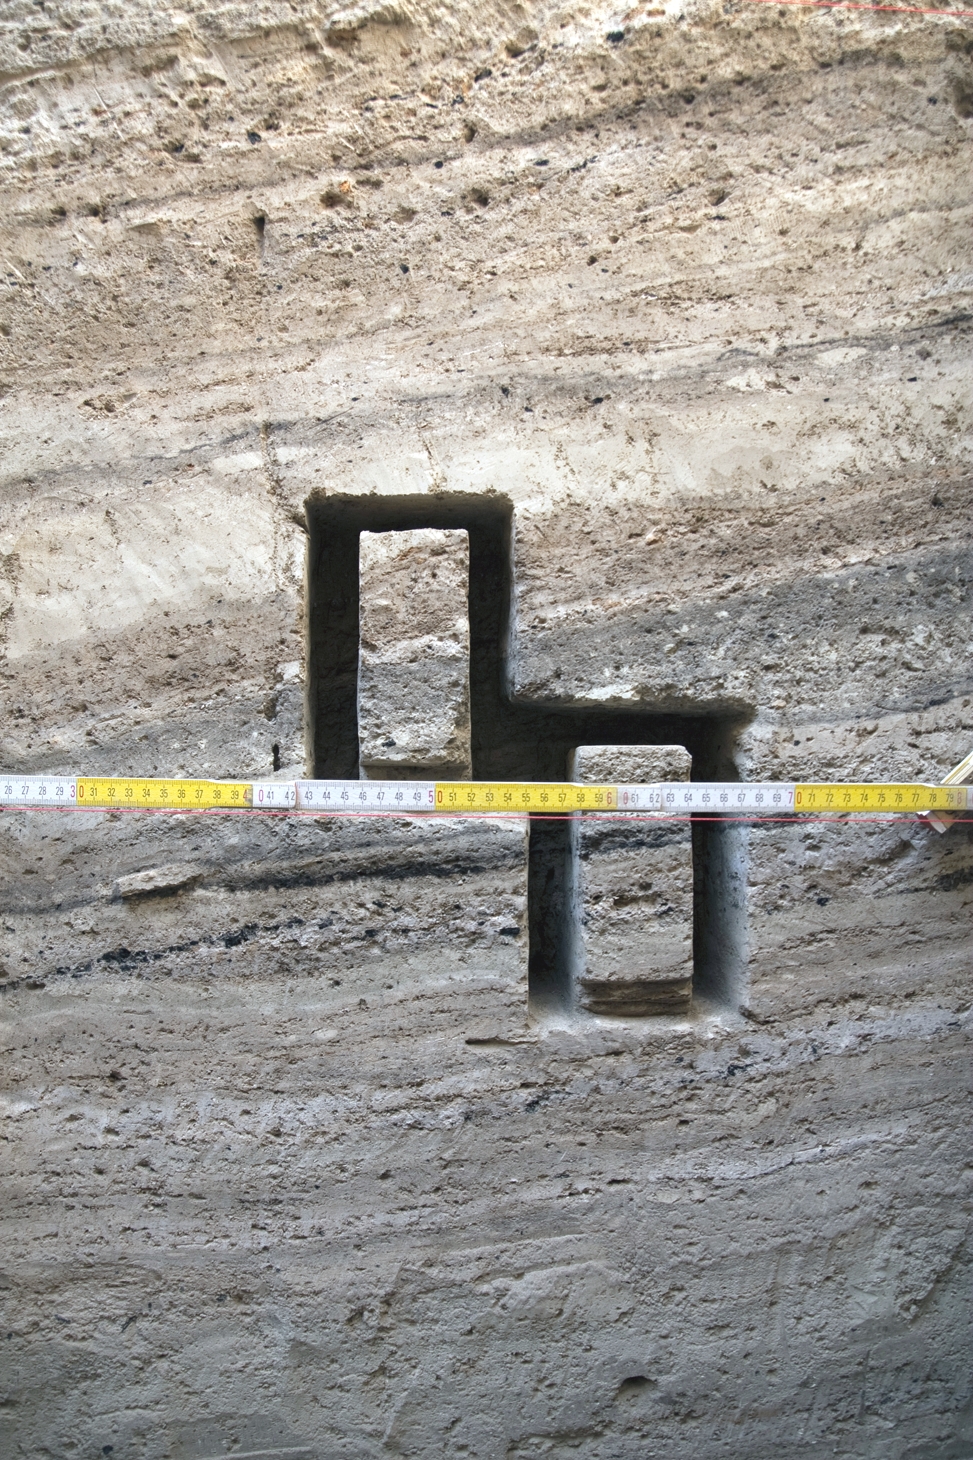 Microstratigraphic sampling in the deep sounding of Unit C.